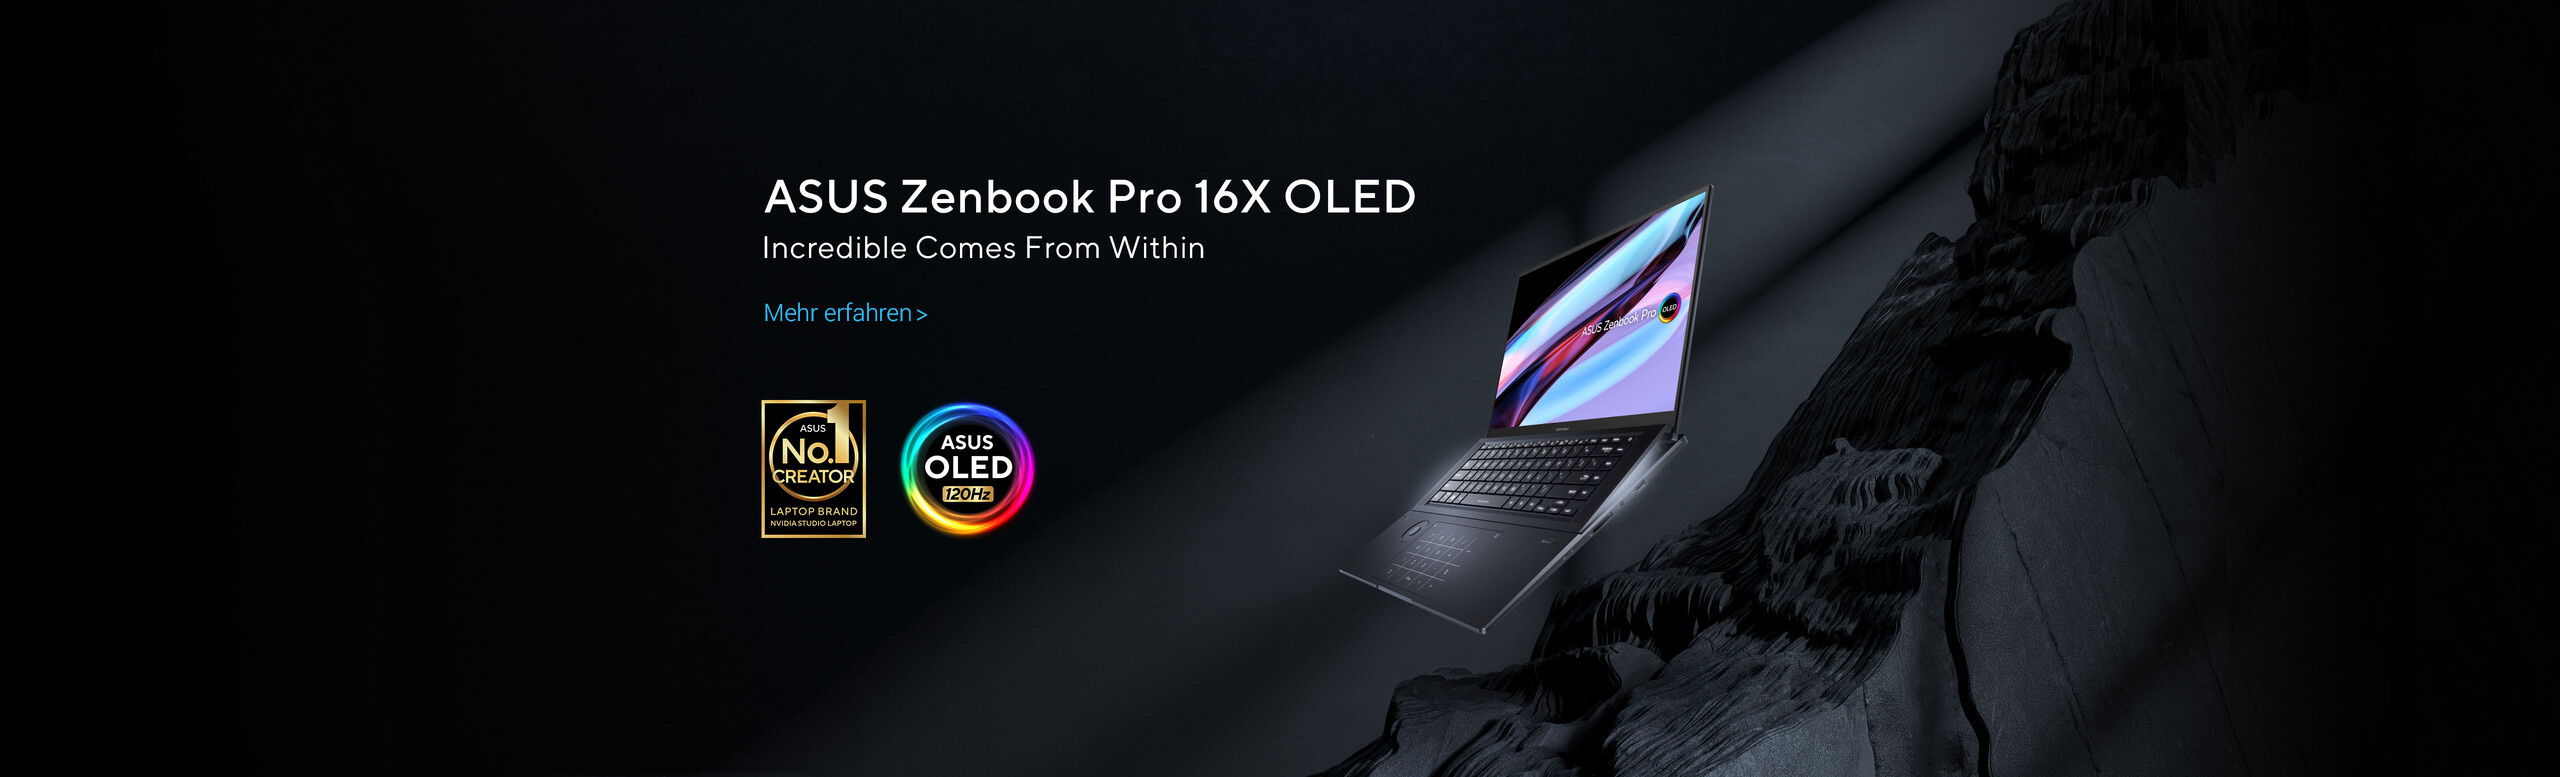 ASUS Zenbook Pro 16X OLED opened with 120 degrees tilted on the surface of dark rock. The No1 Creator and ASUS 120Hz OLED logo are placed next to the model.